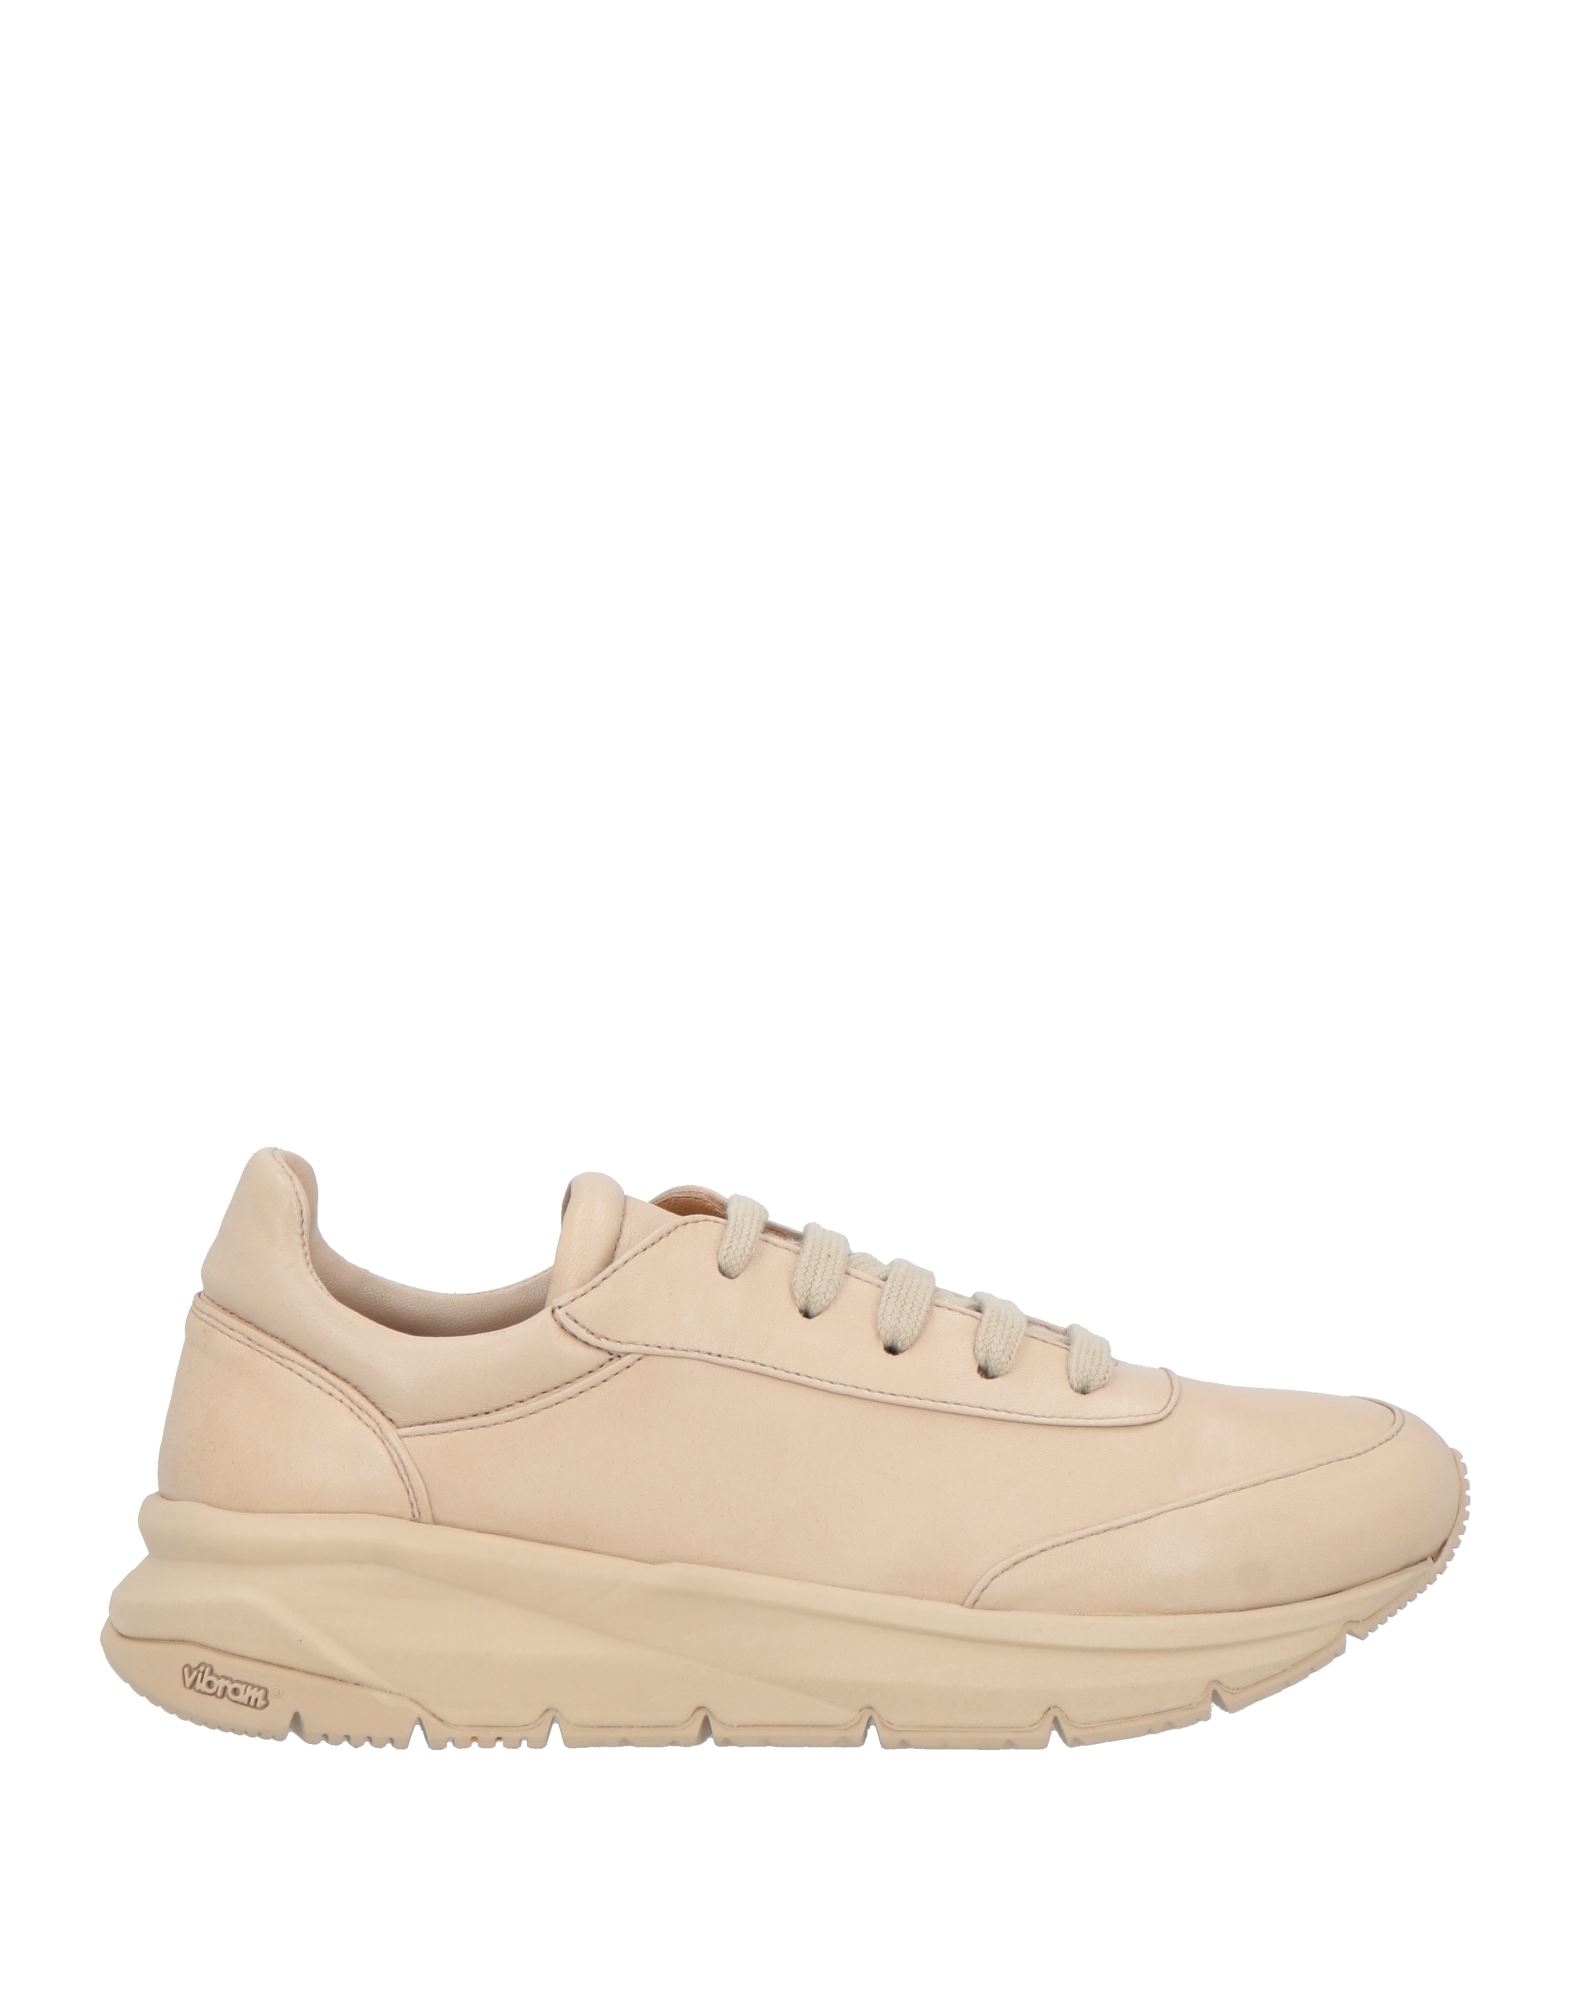 POMME D'OR Sneakers Damen Cremeweiß von POMME D'OR